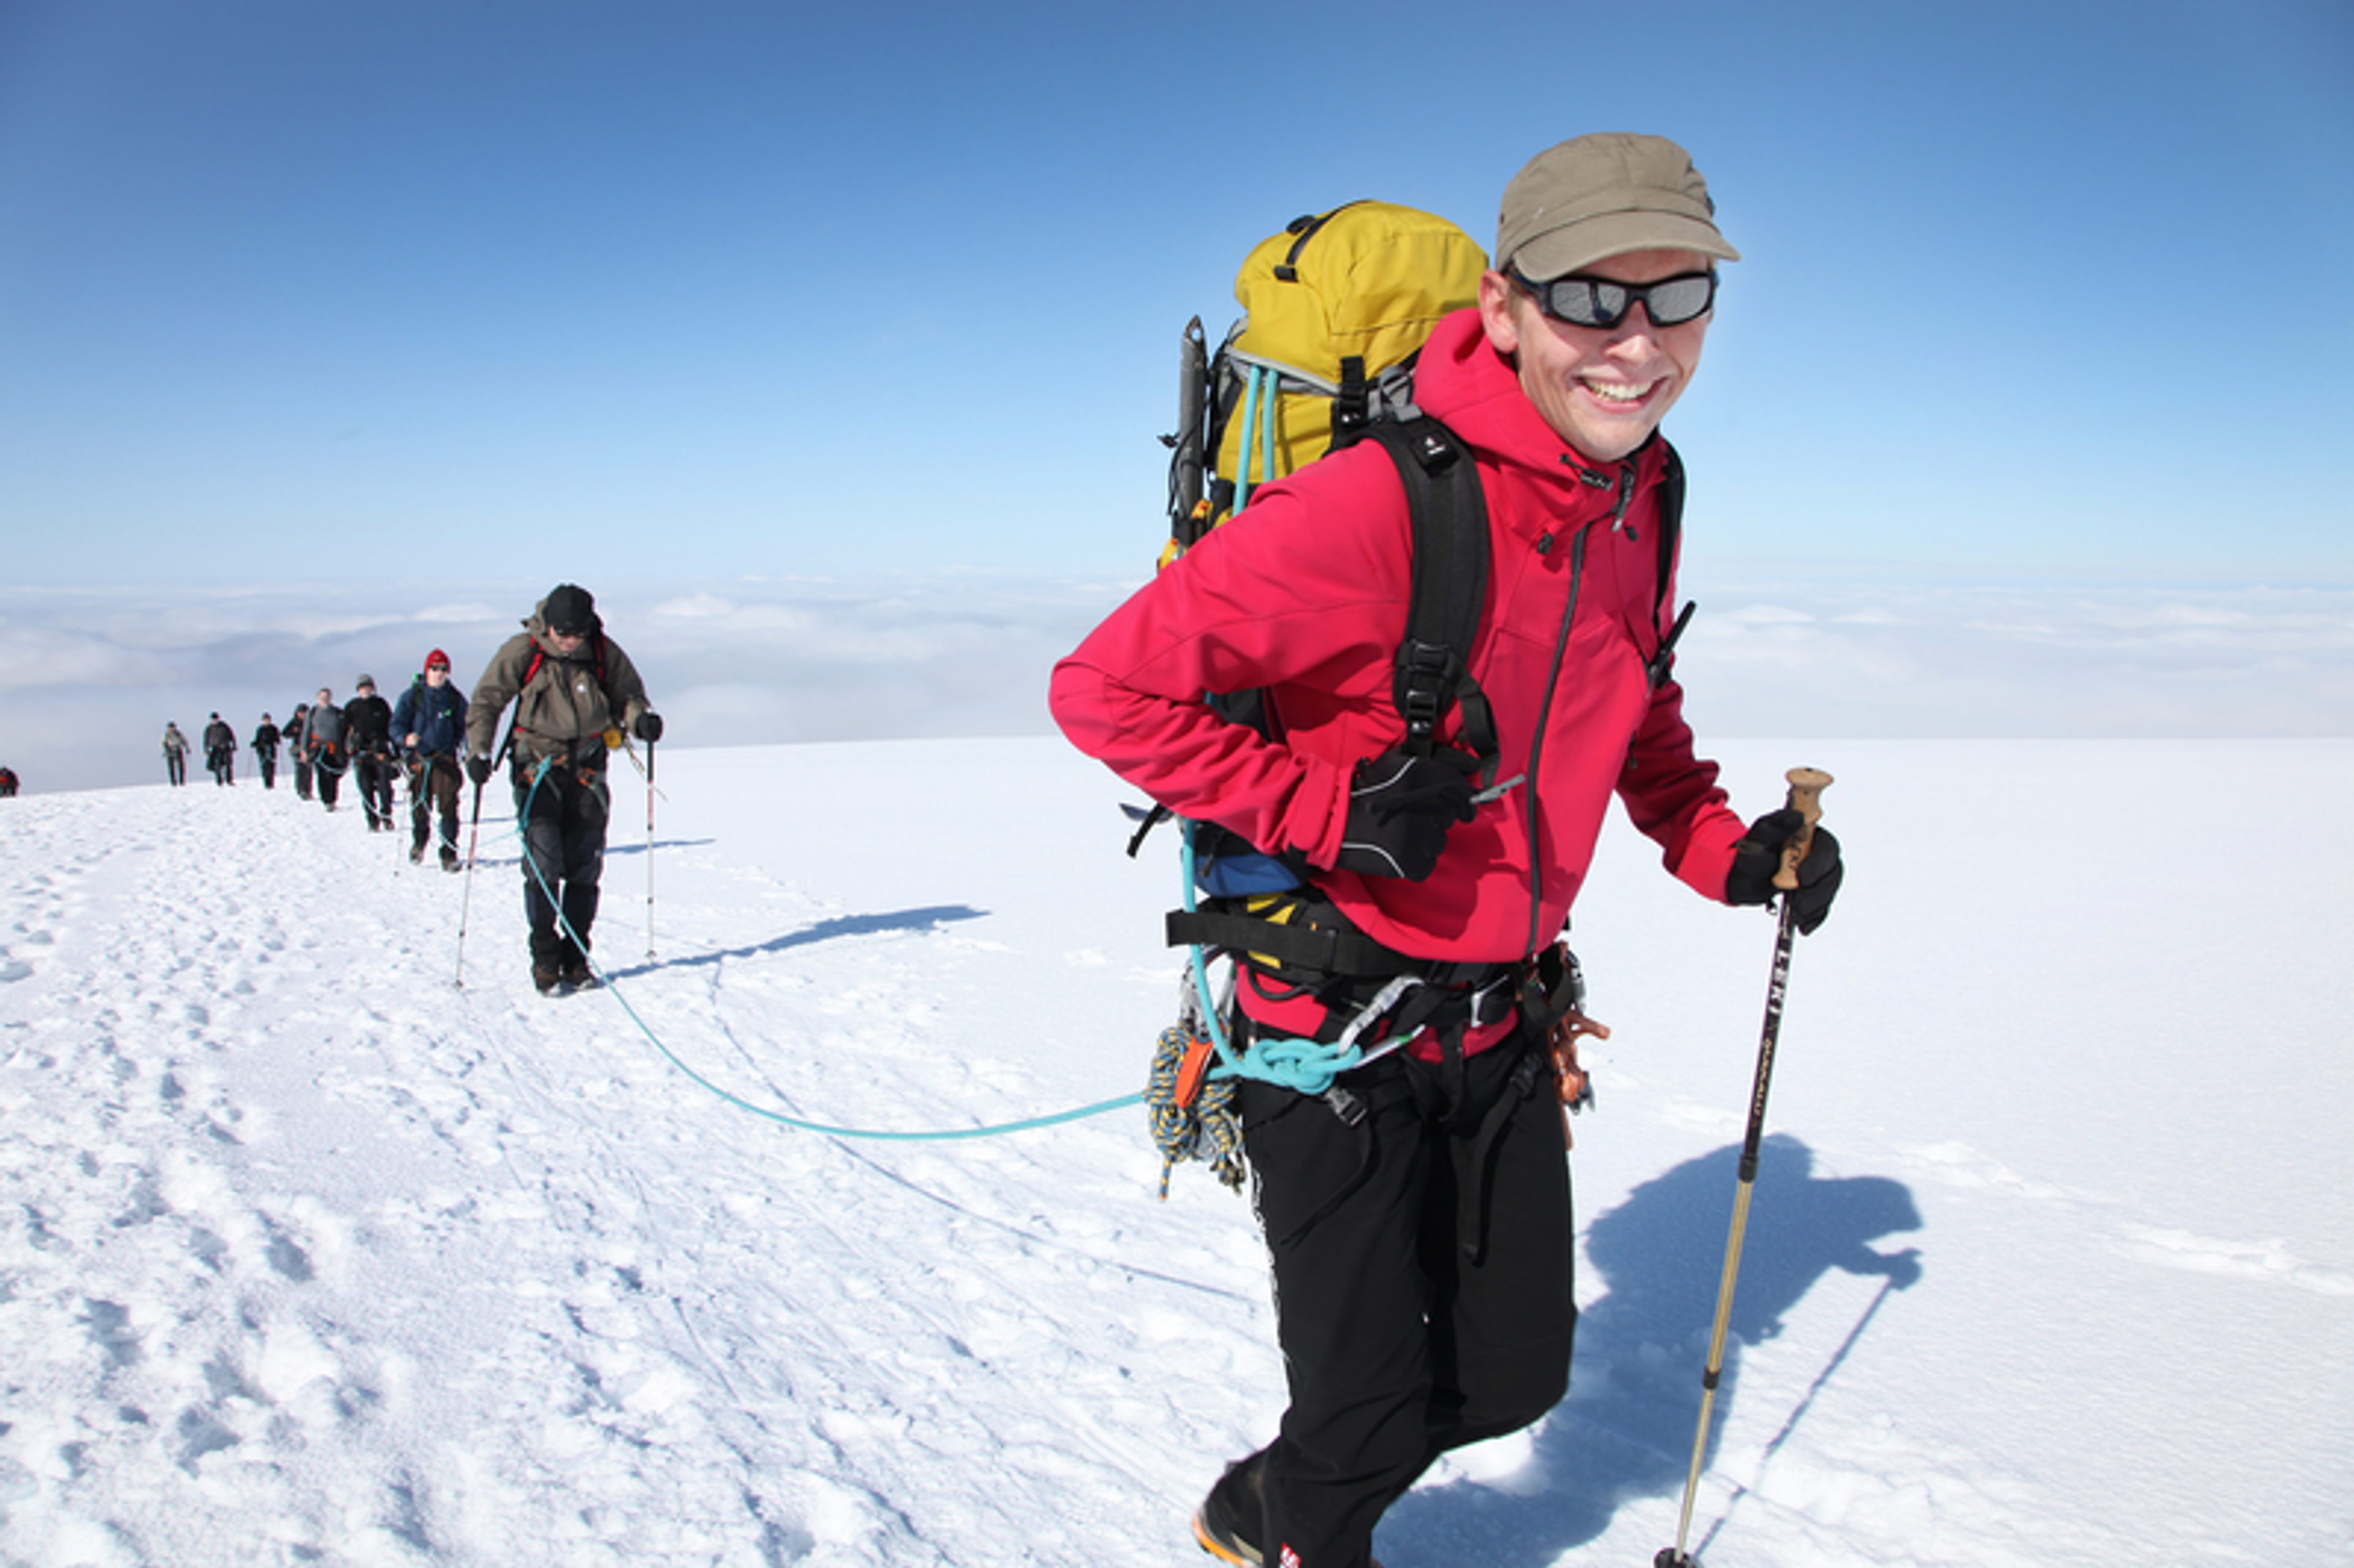 An expert guide leading a group of hikers up to the summit of Hvannadalsnjúkur Mountain in the Skaftafell area, Iceland.